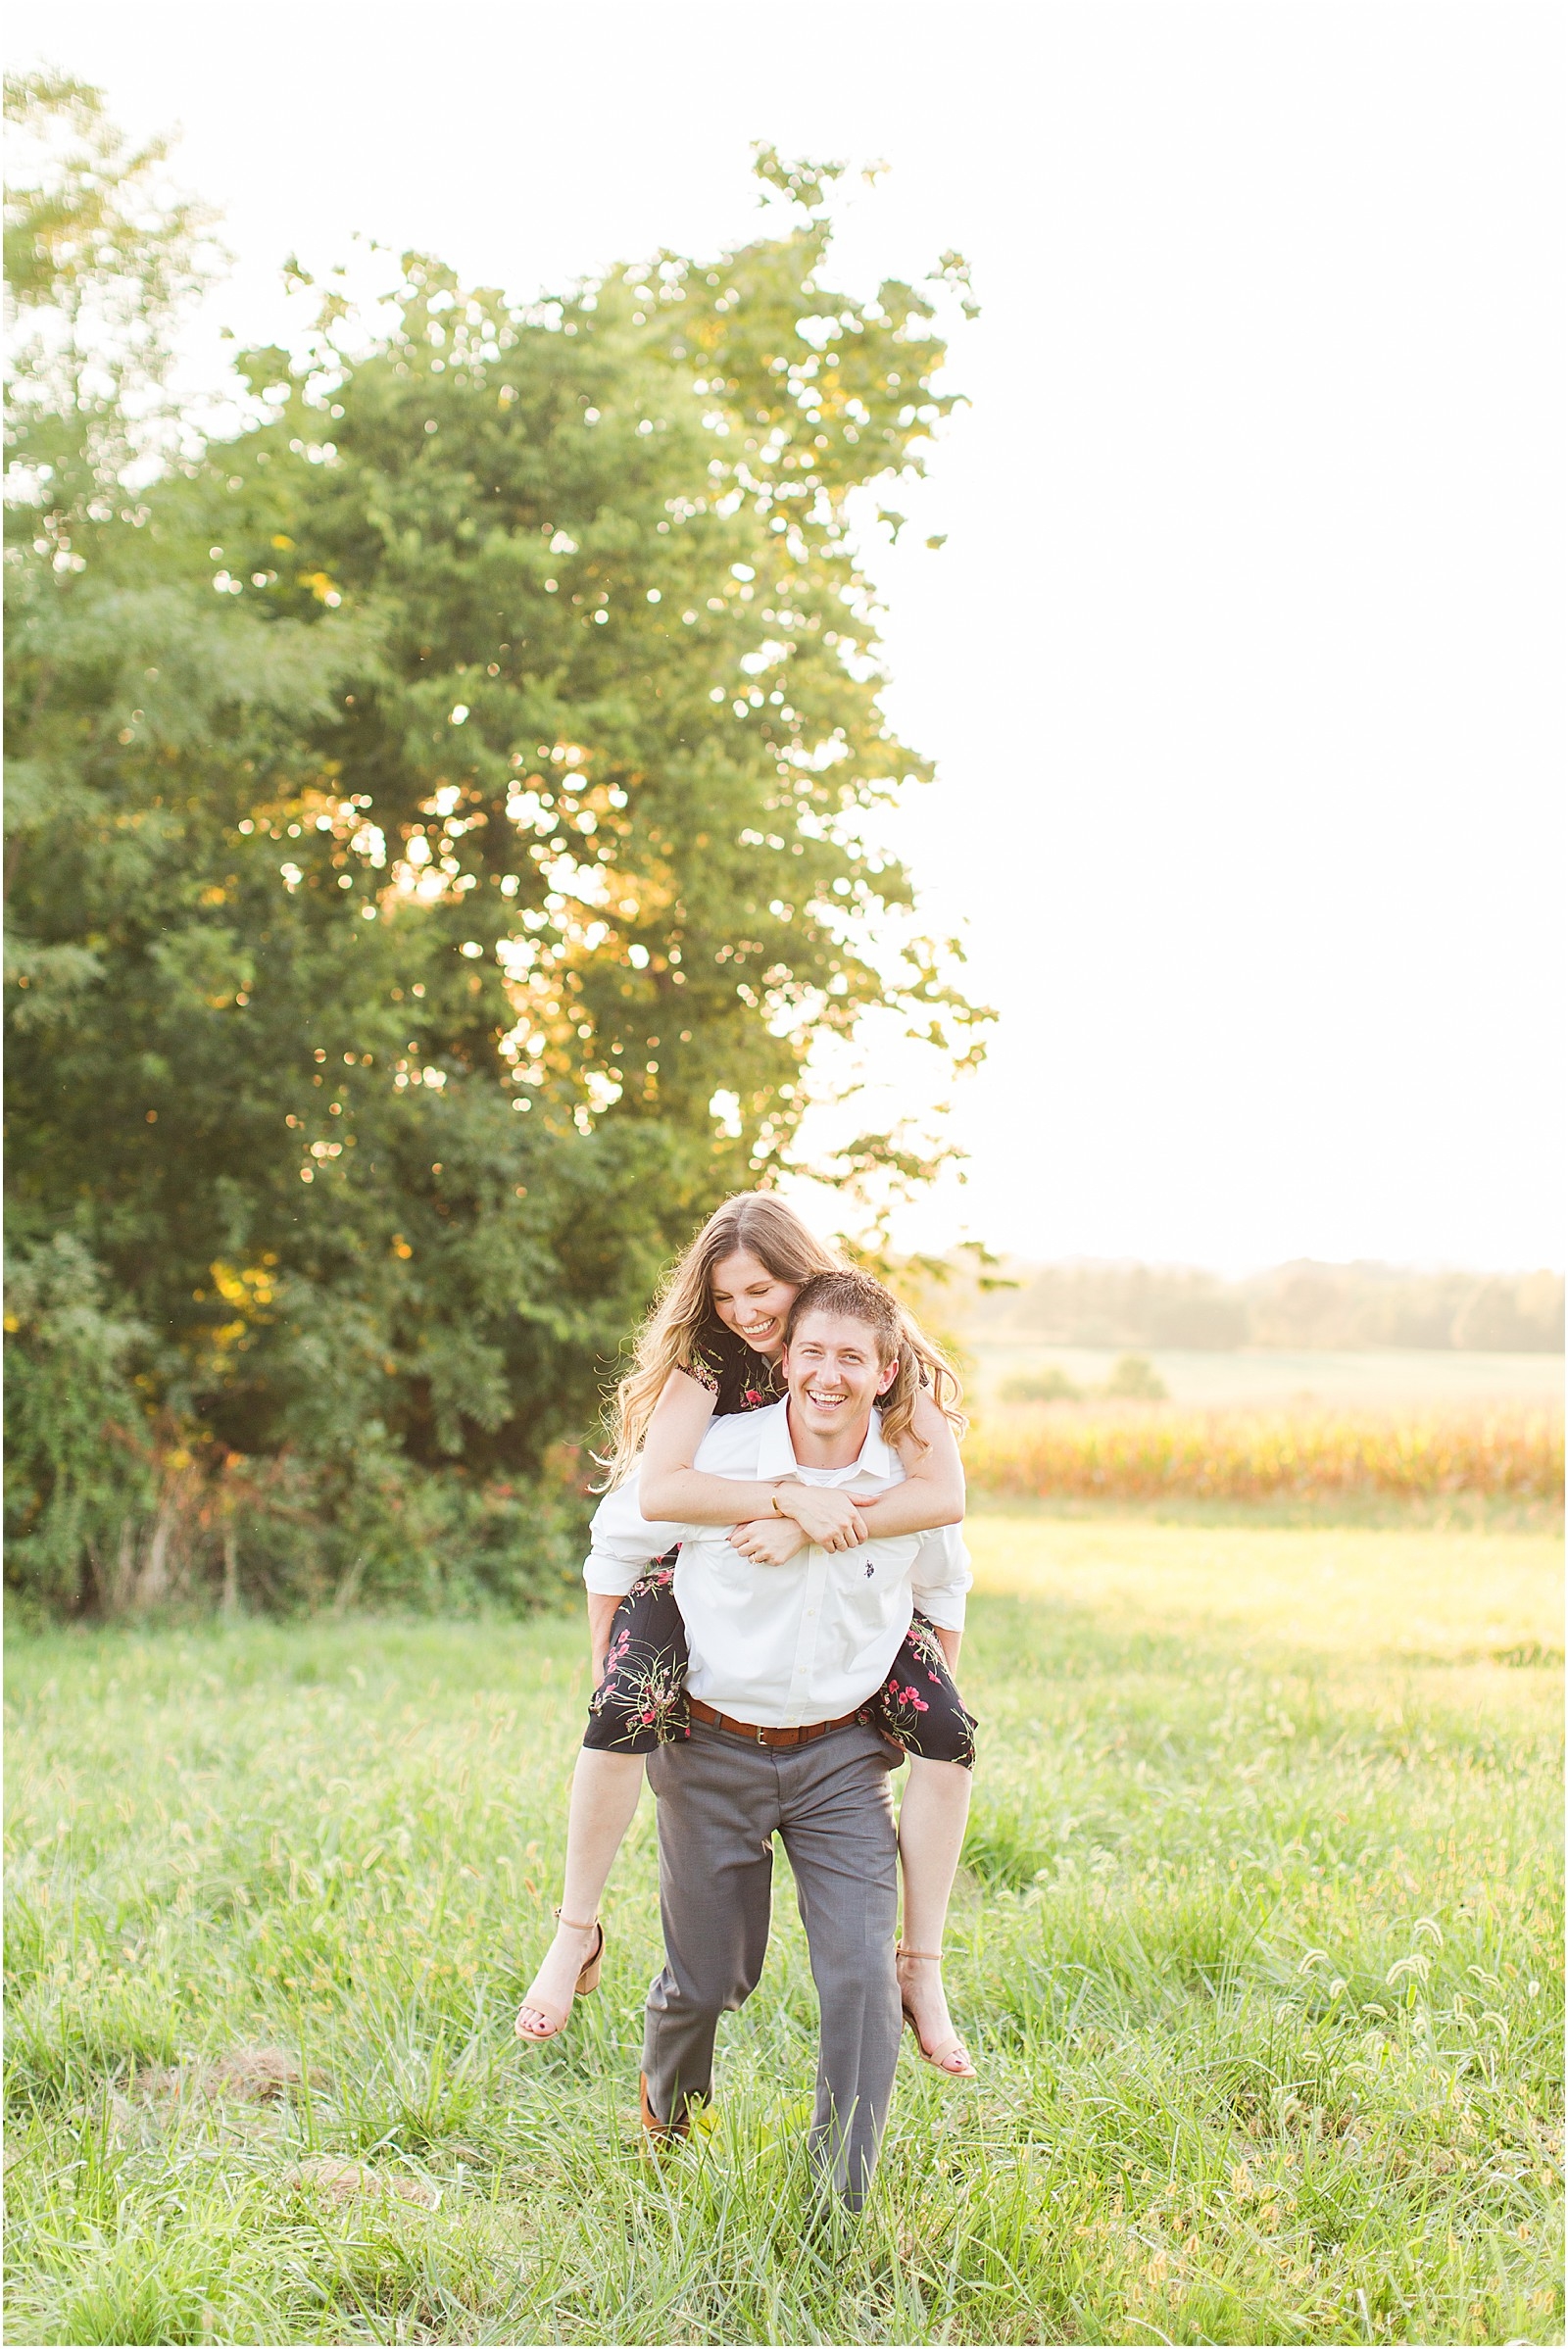 A Jasper Indiana Engagement Session | Tori and Kyle | Bret and Brandie Photography032.jpg